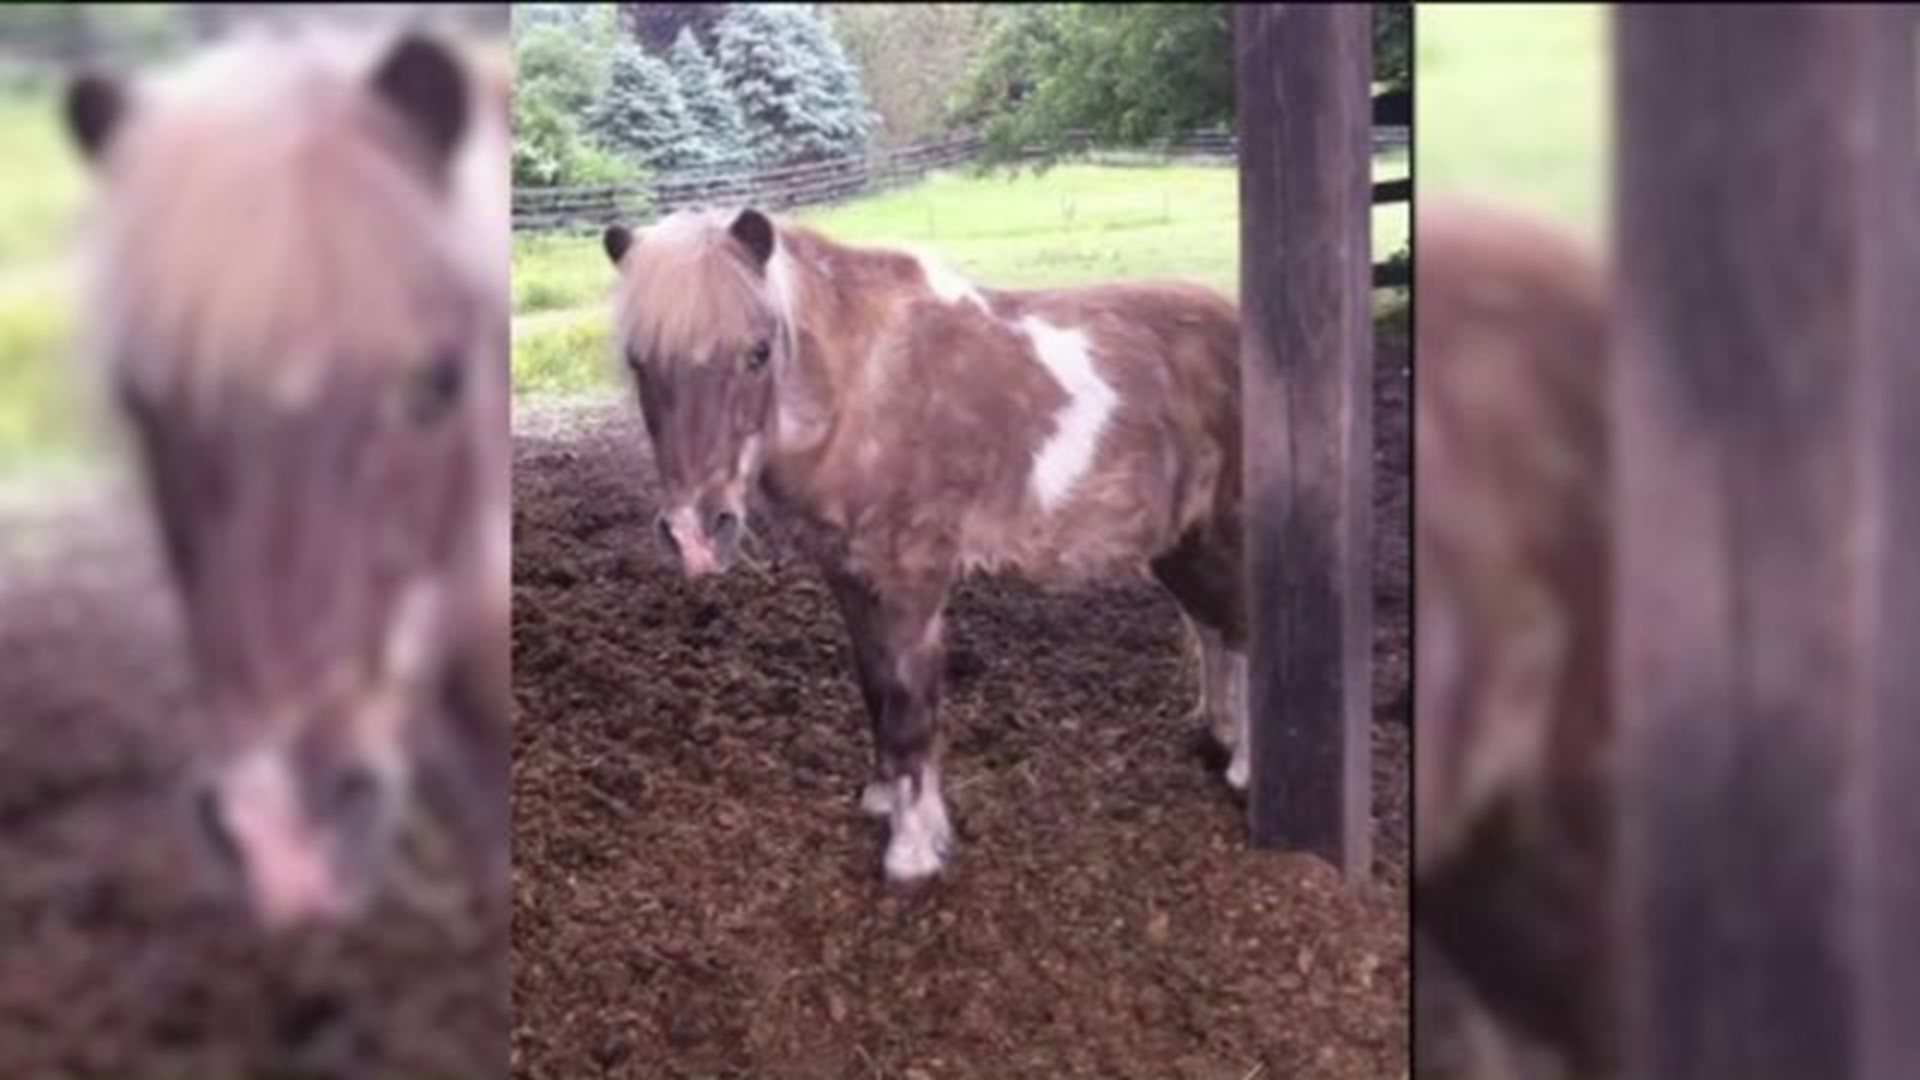 Police Investigating Death of Therapy Pony